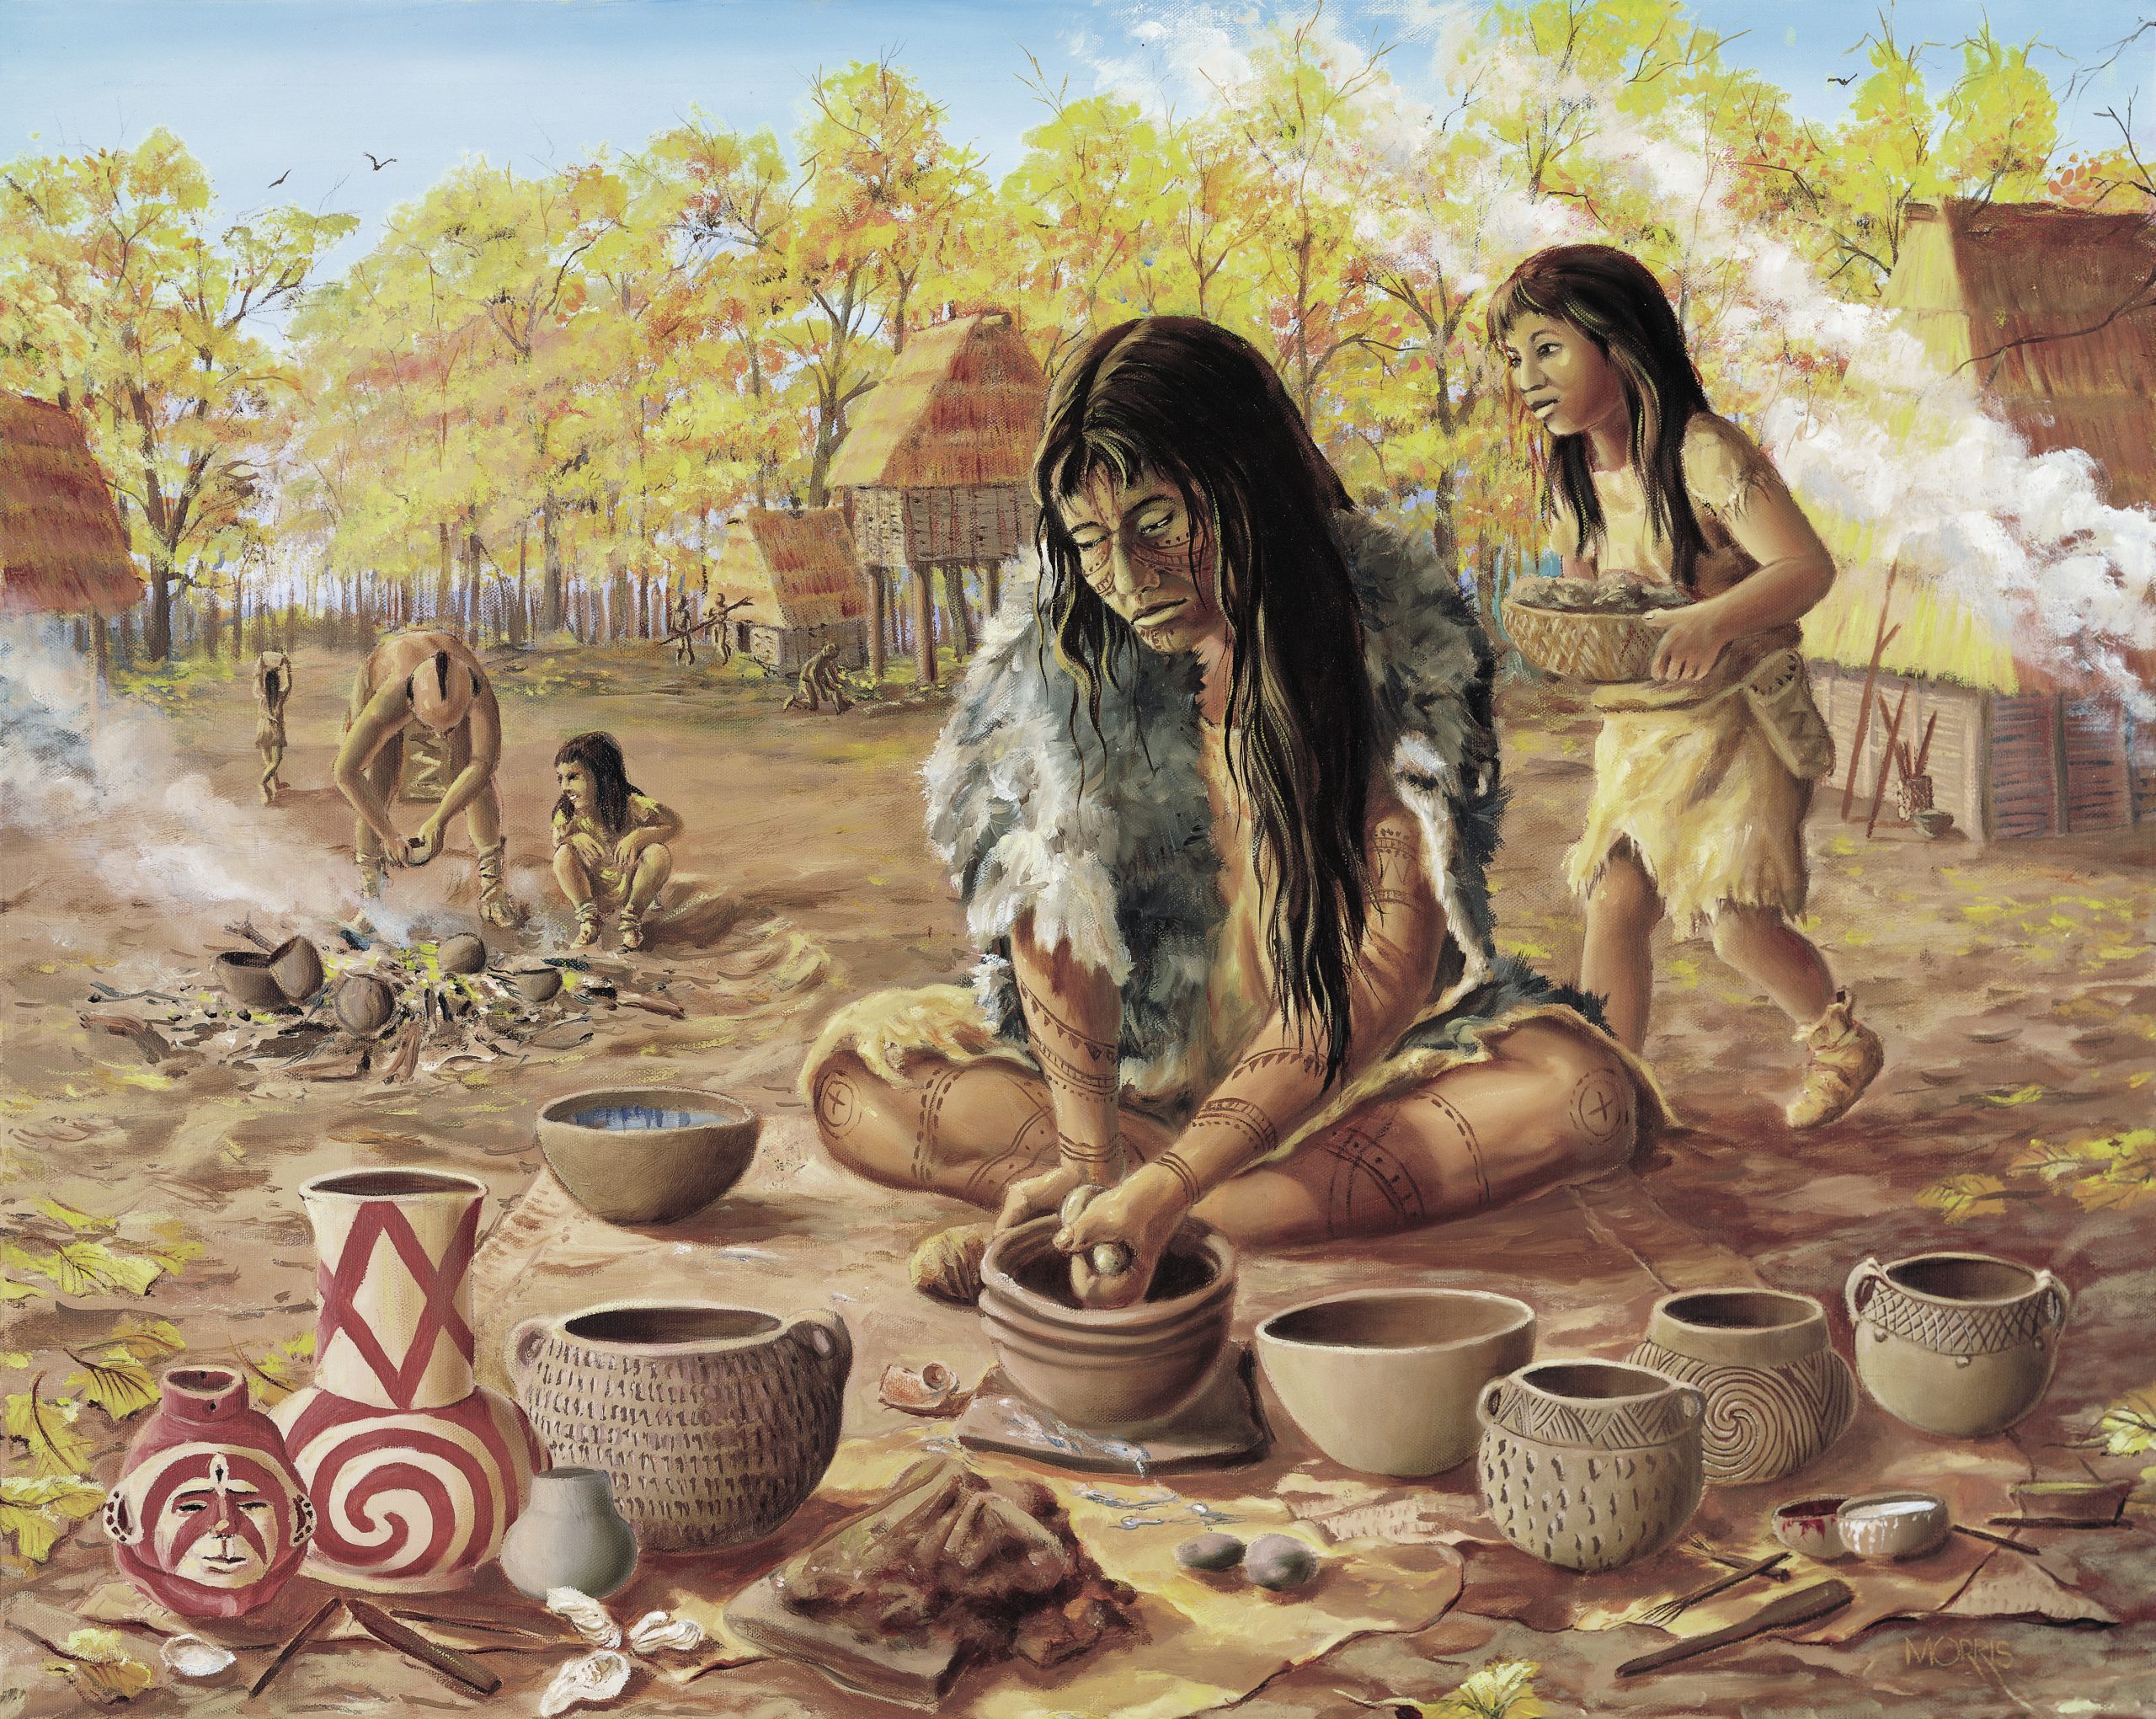 Scene with woman making a pot, girl carrying clay, and man and boy firing pots